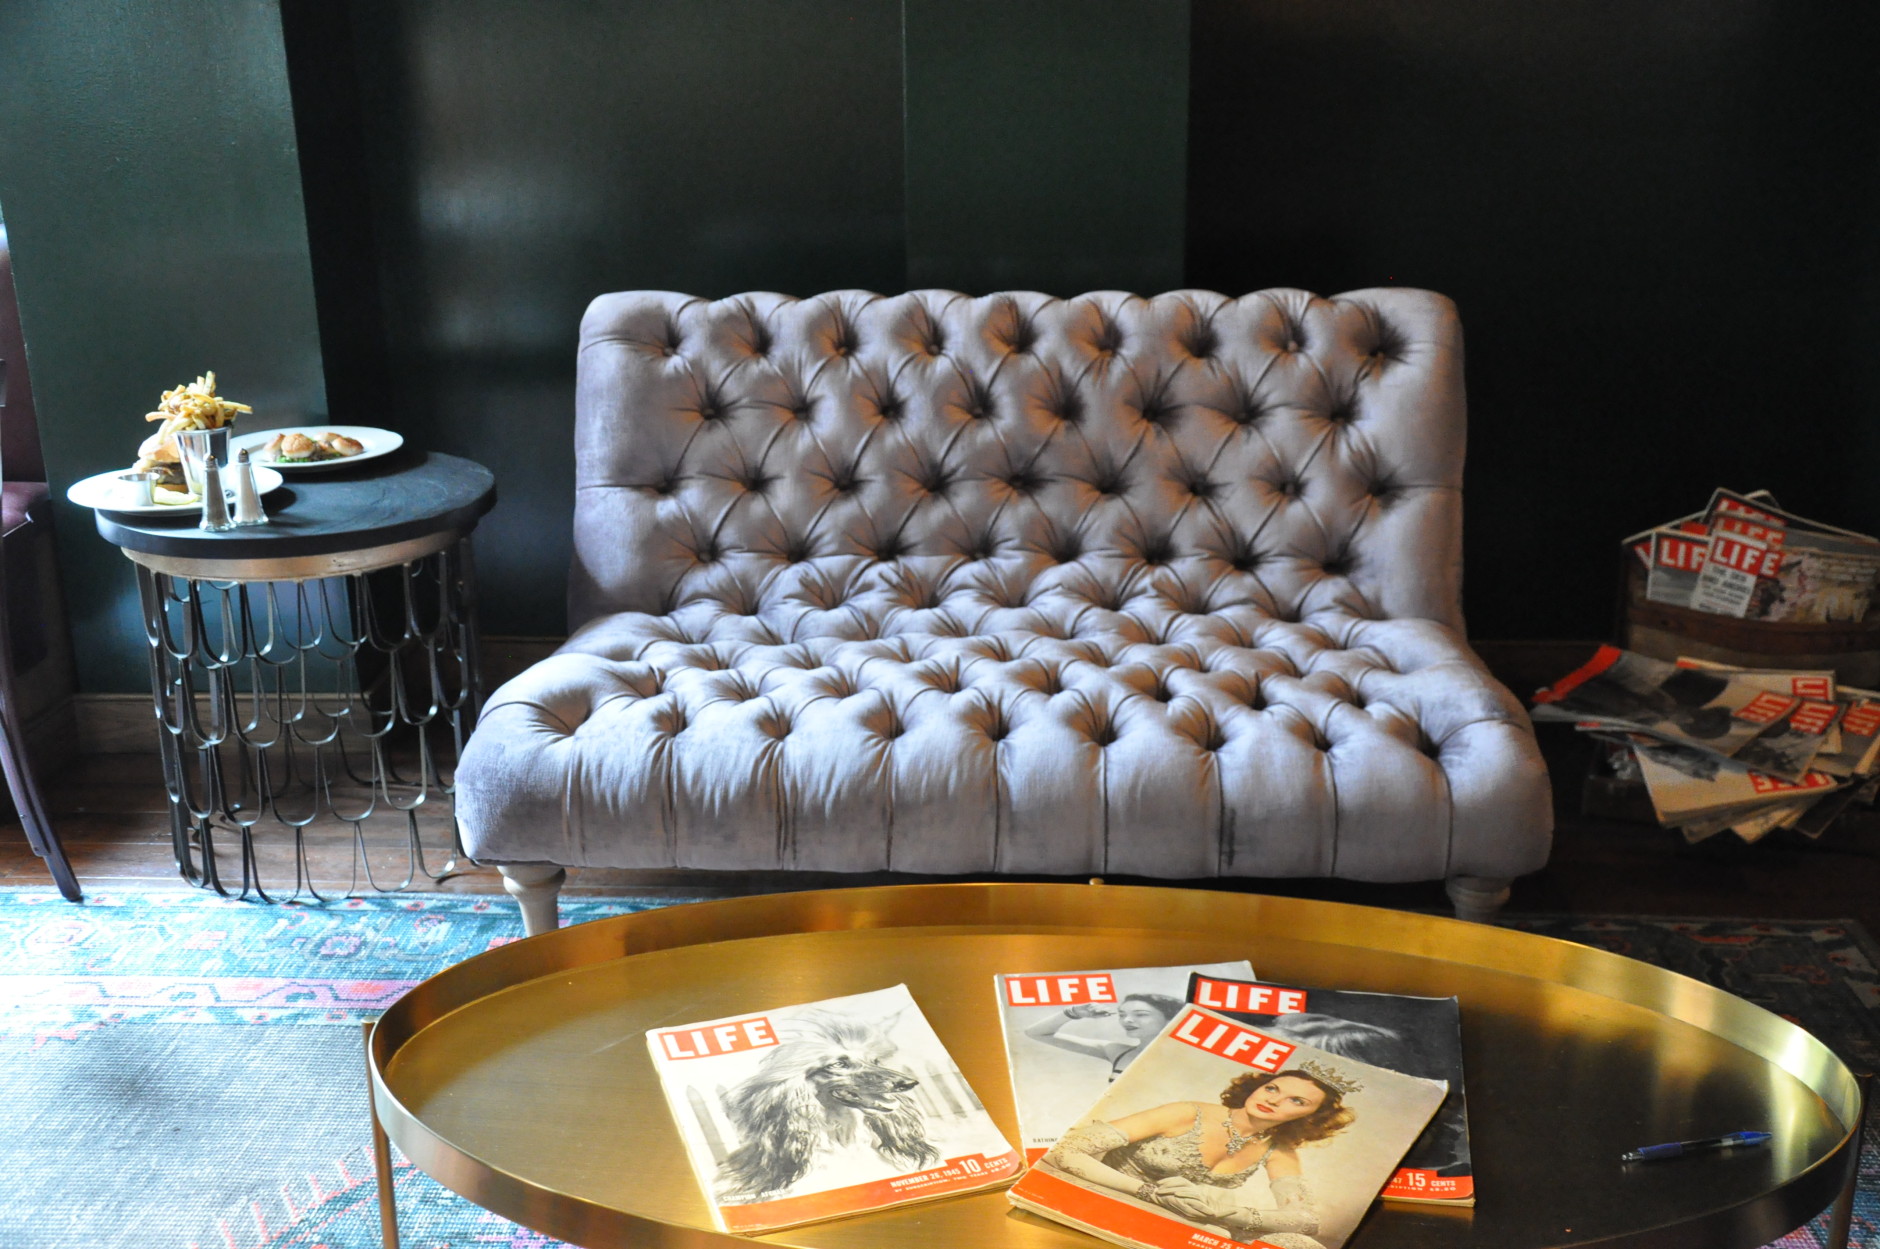 Vintage Life magazines decorate a gold coffee table in the lounge. (WTOP/Rachel Nania)